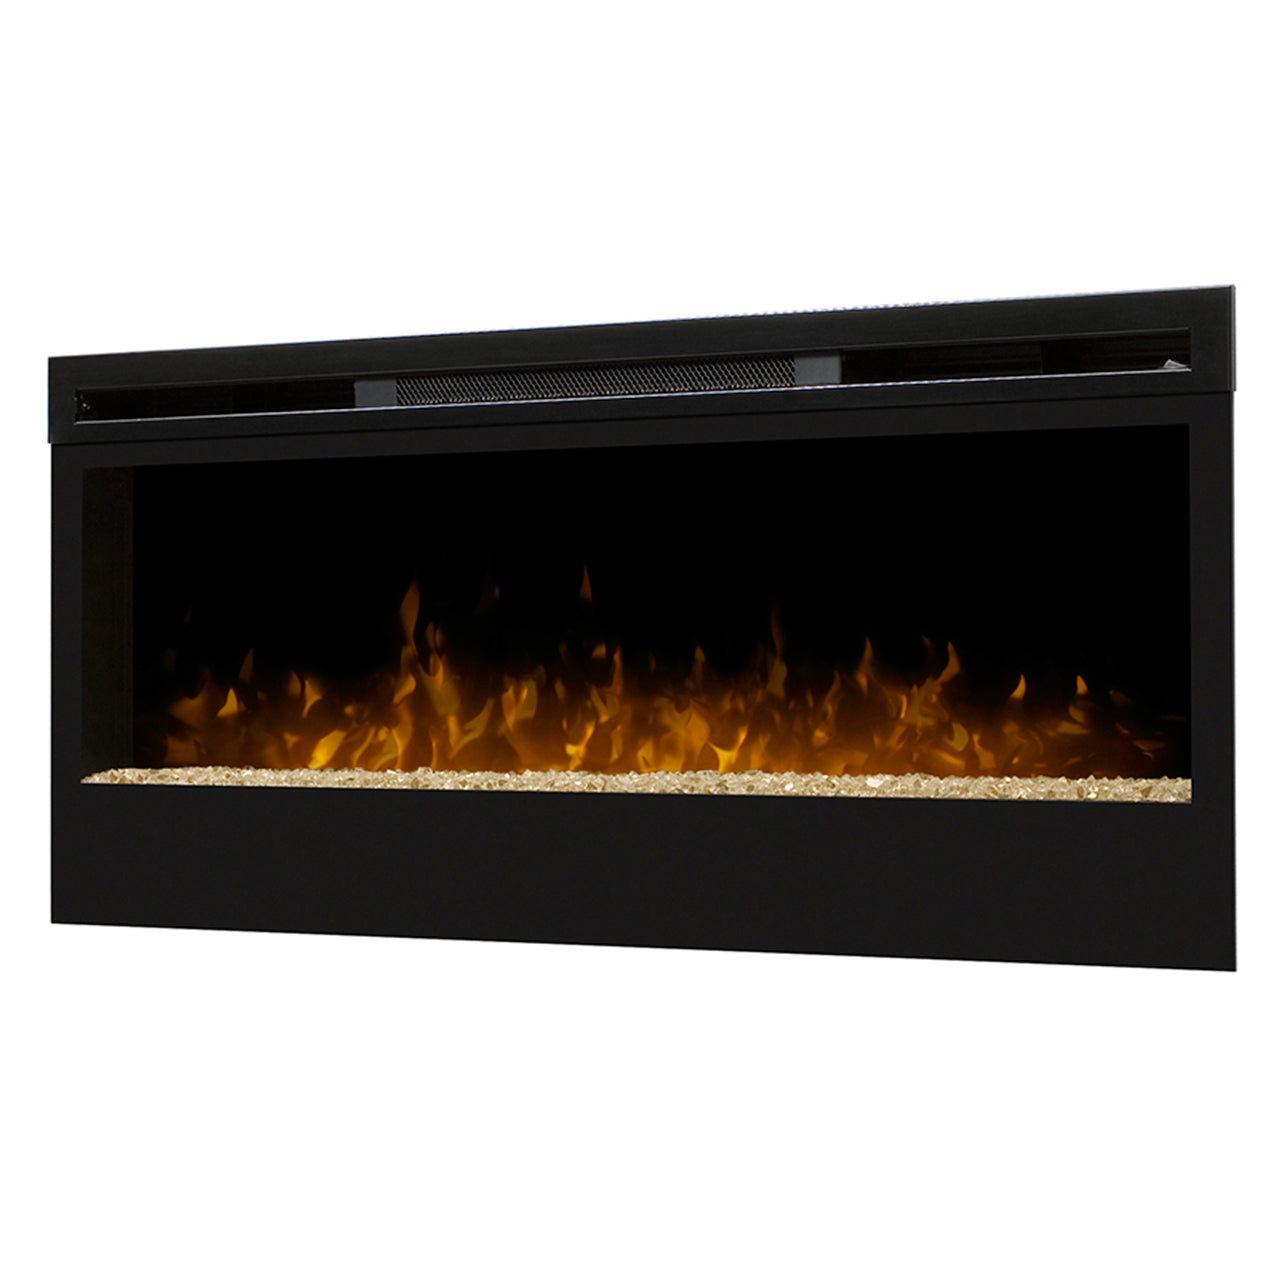 Synergy 50" Linear Electric Fireplace